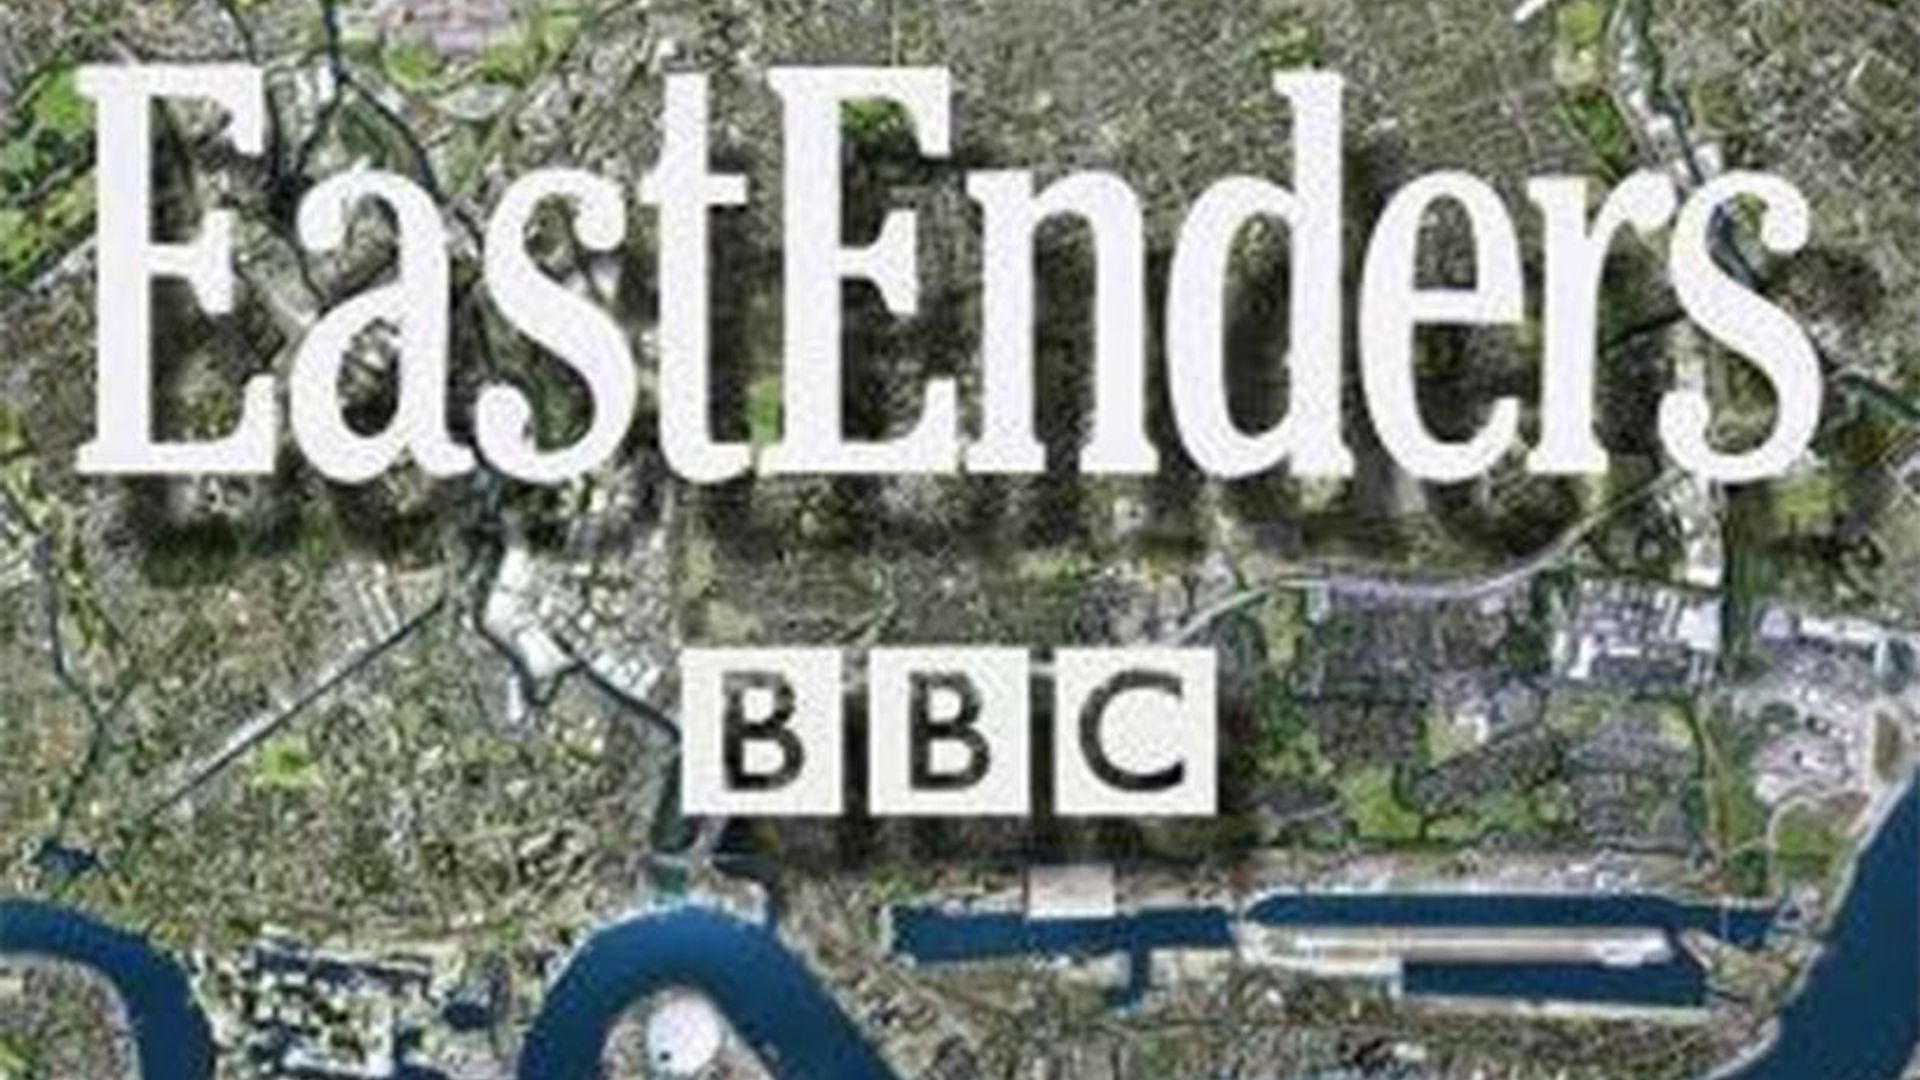 This iconic EastEnders character is returning to Walford